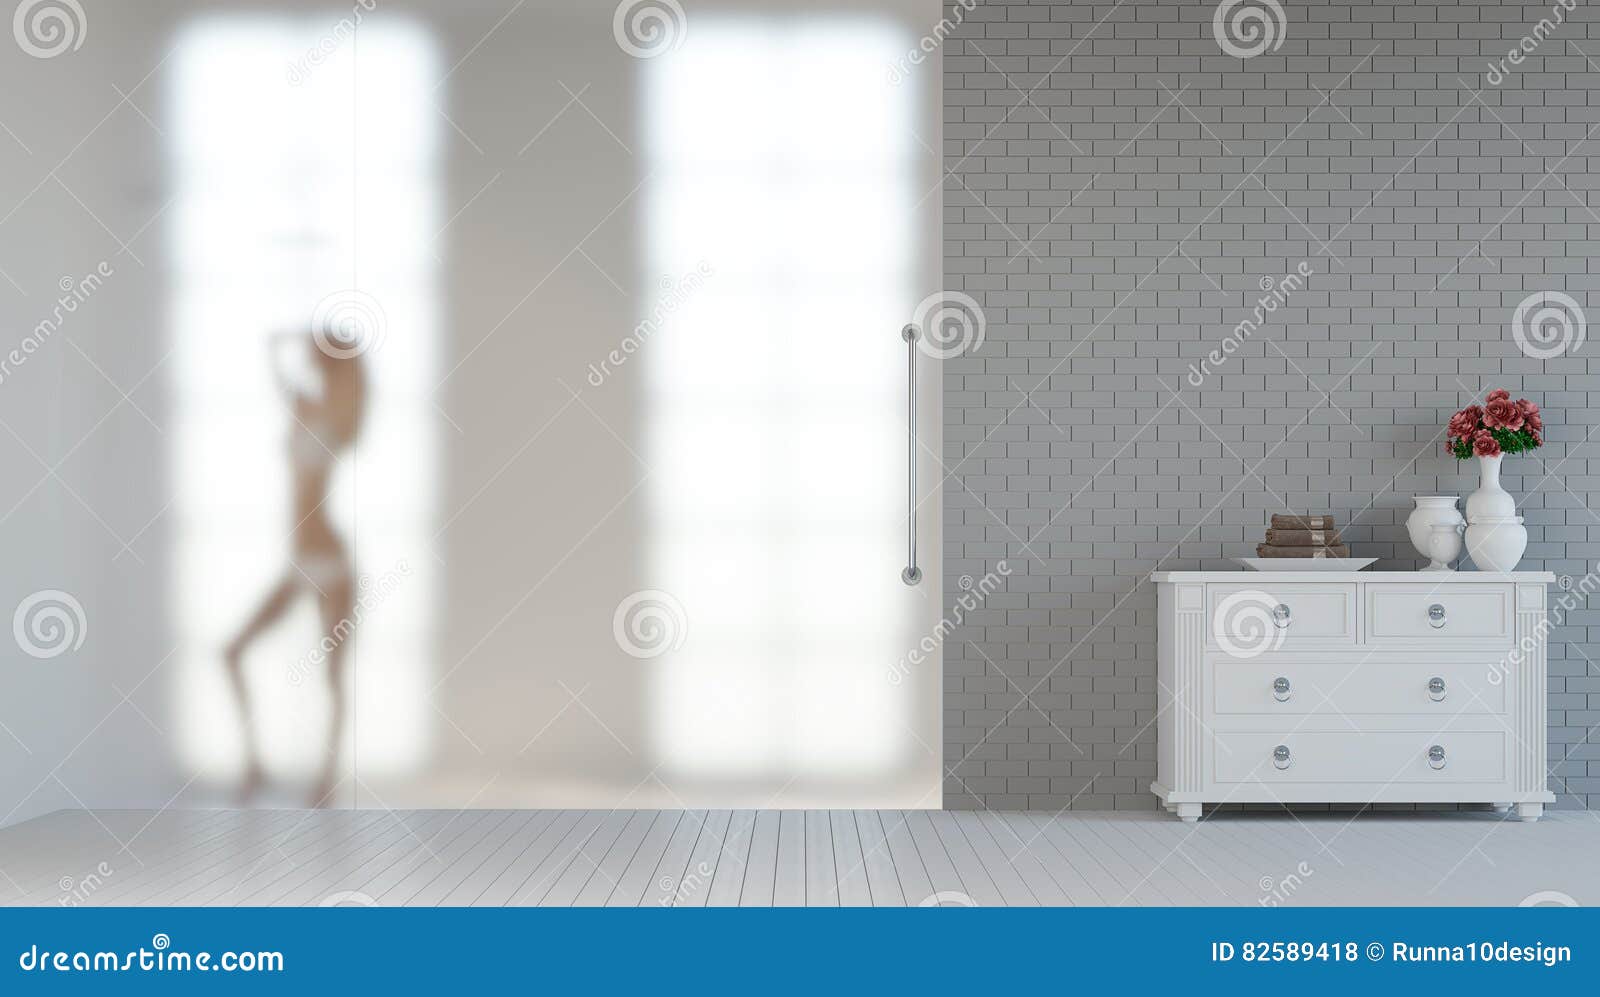 Women Shower Behind Frost Glass 3d Rendering Image Stock